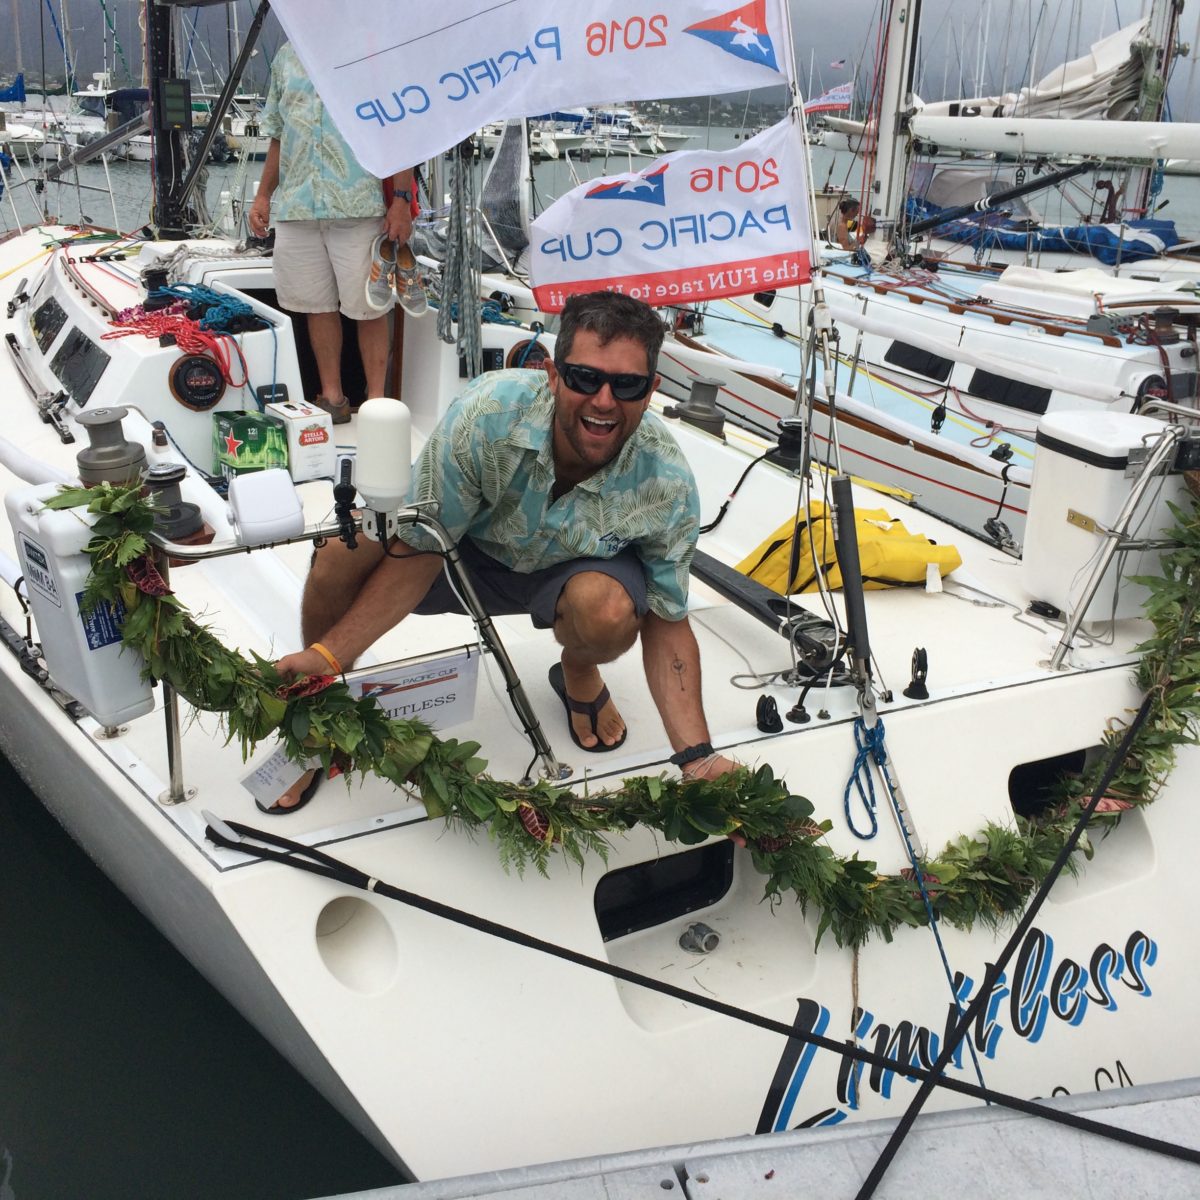 Thank you to everyone who contributed to the boat lei for Limitless!